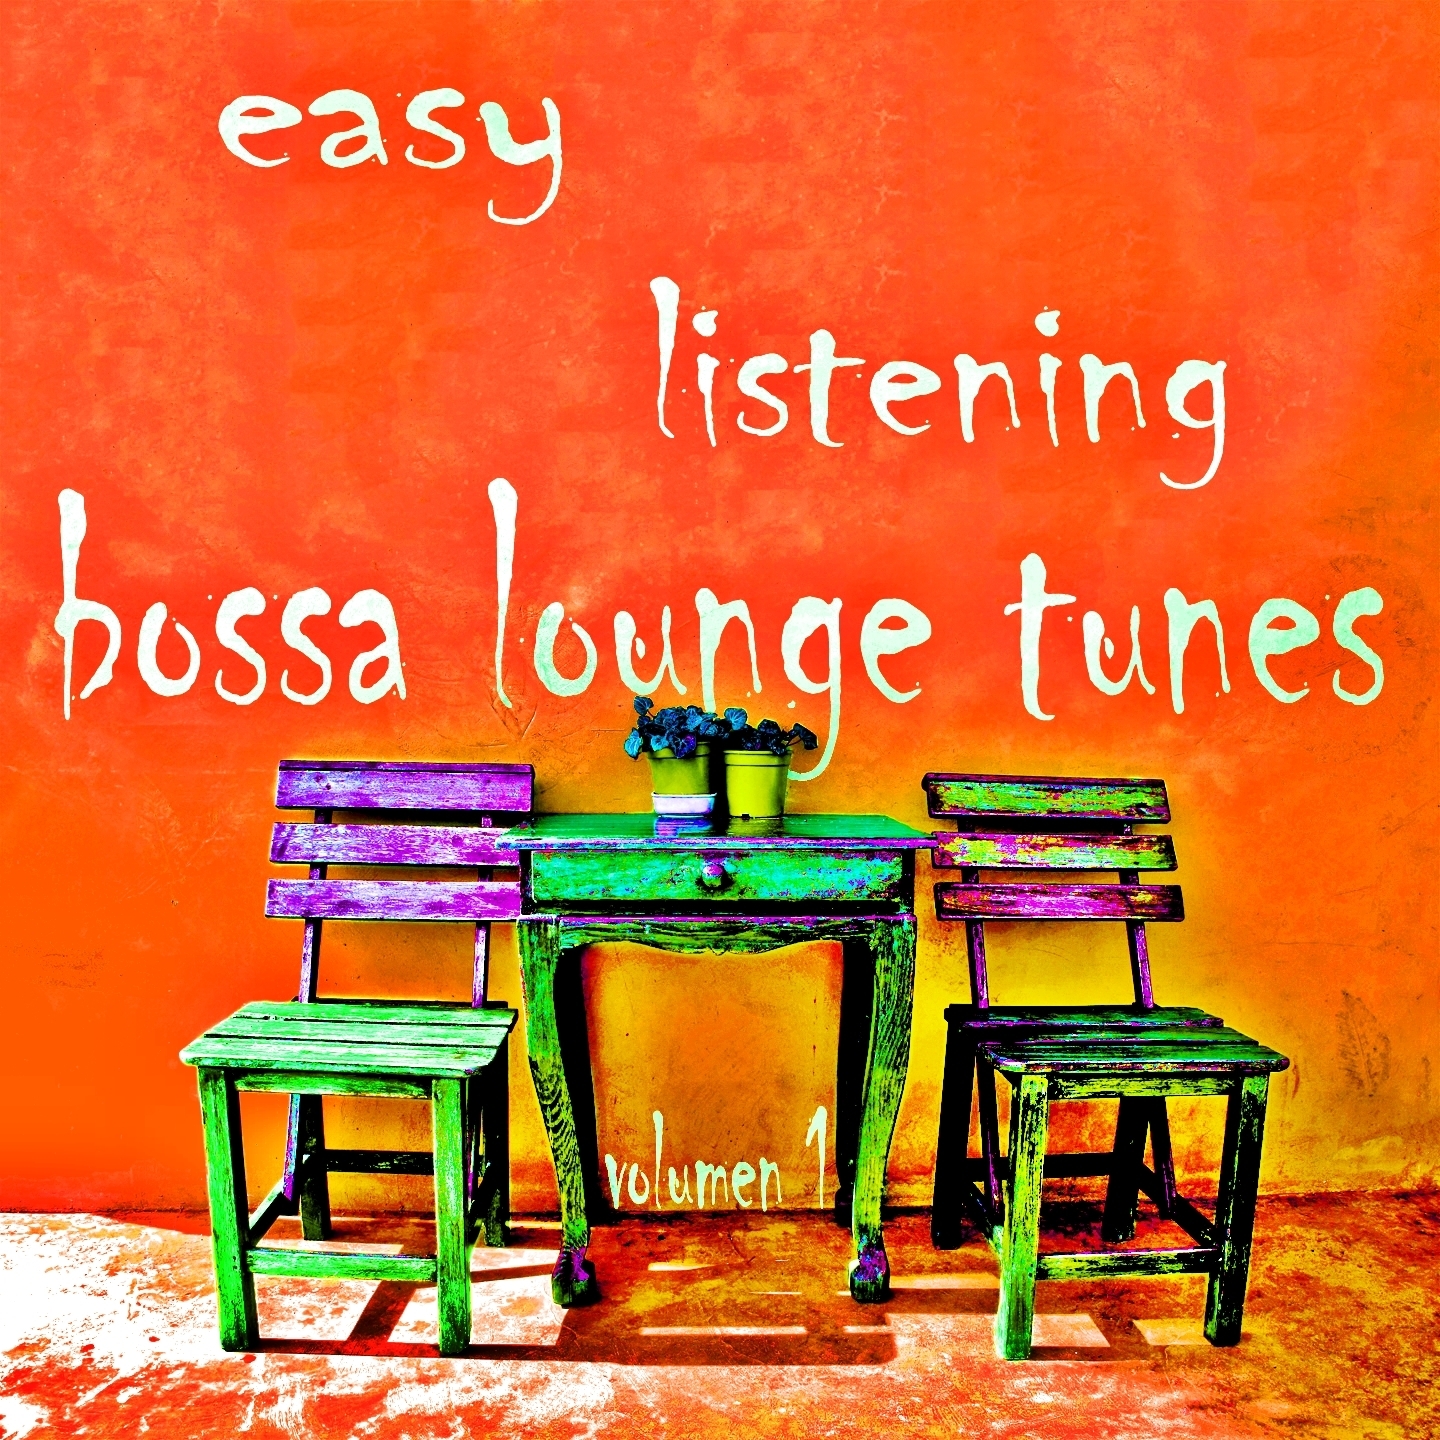 Easy Listening Bossa Lounge Tunes, Vol. 1 (Brazil Jazz and Chill House Selection)